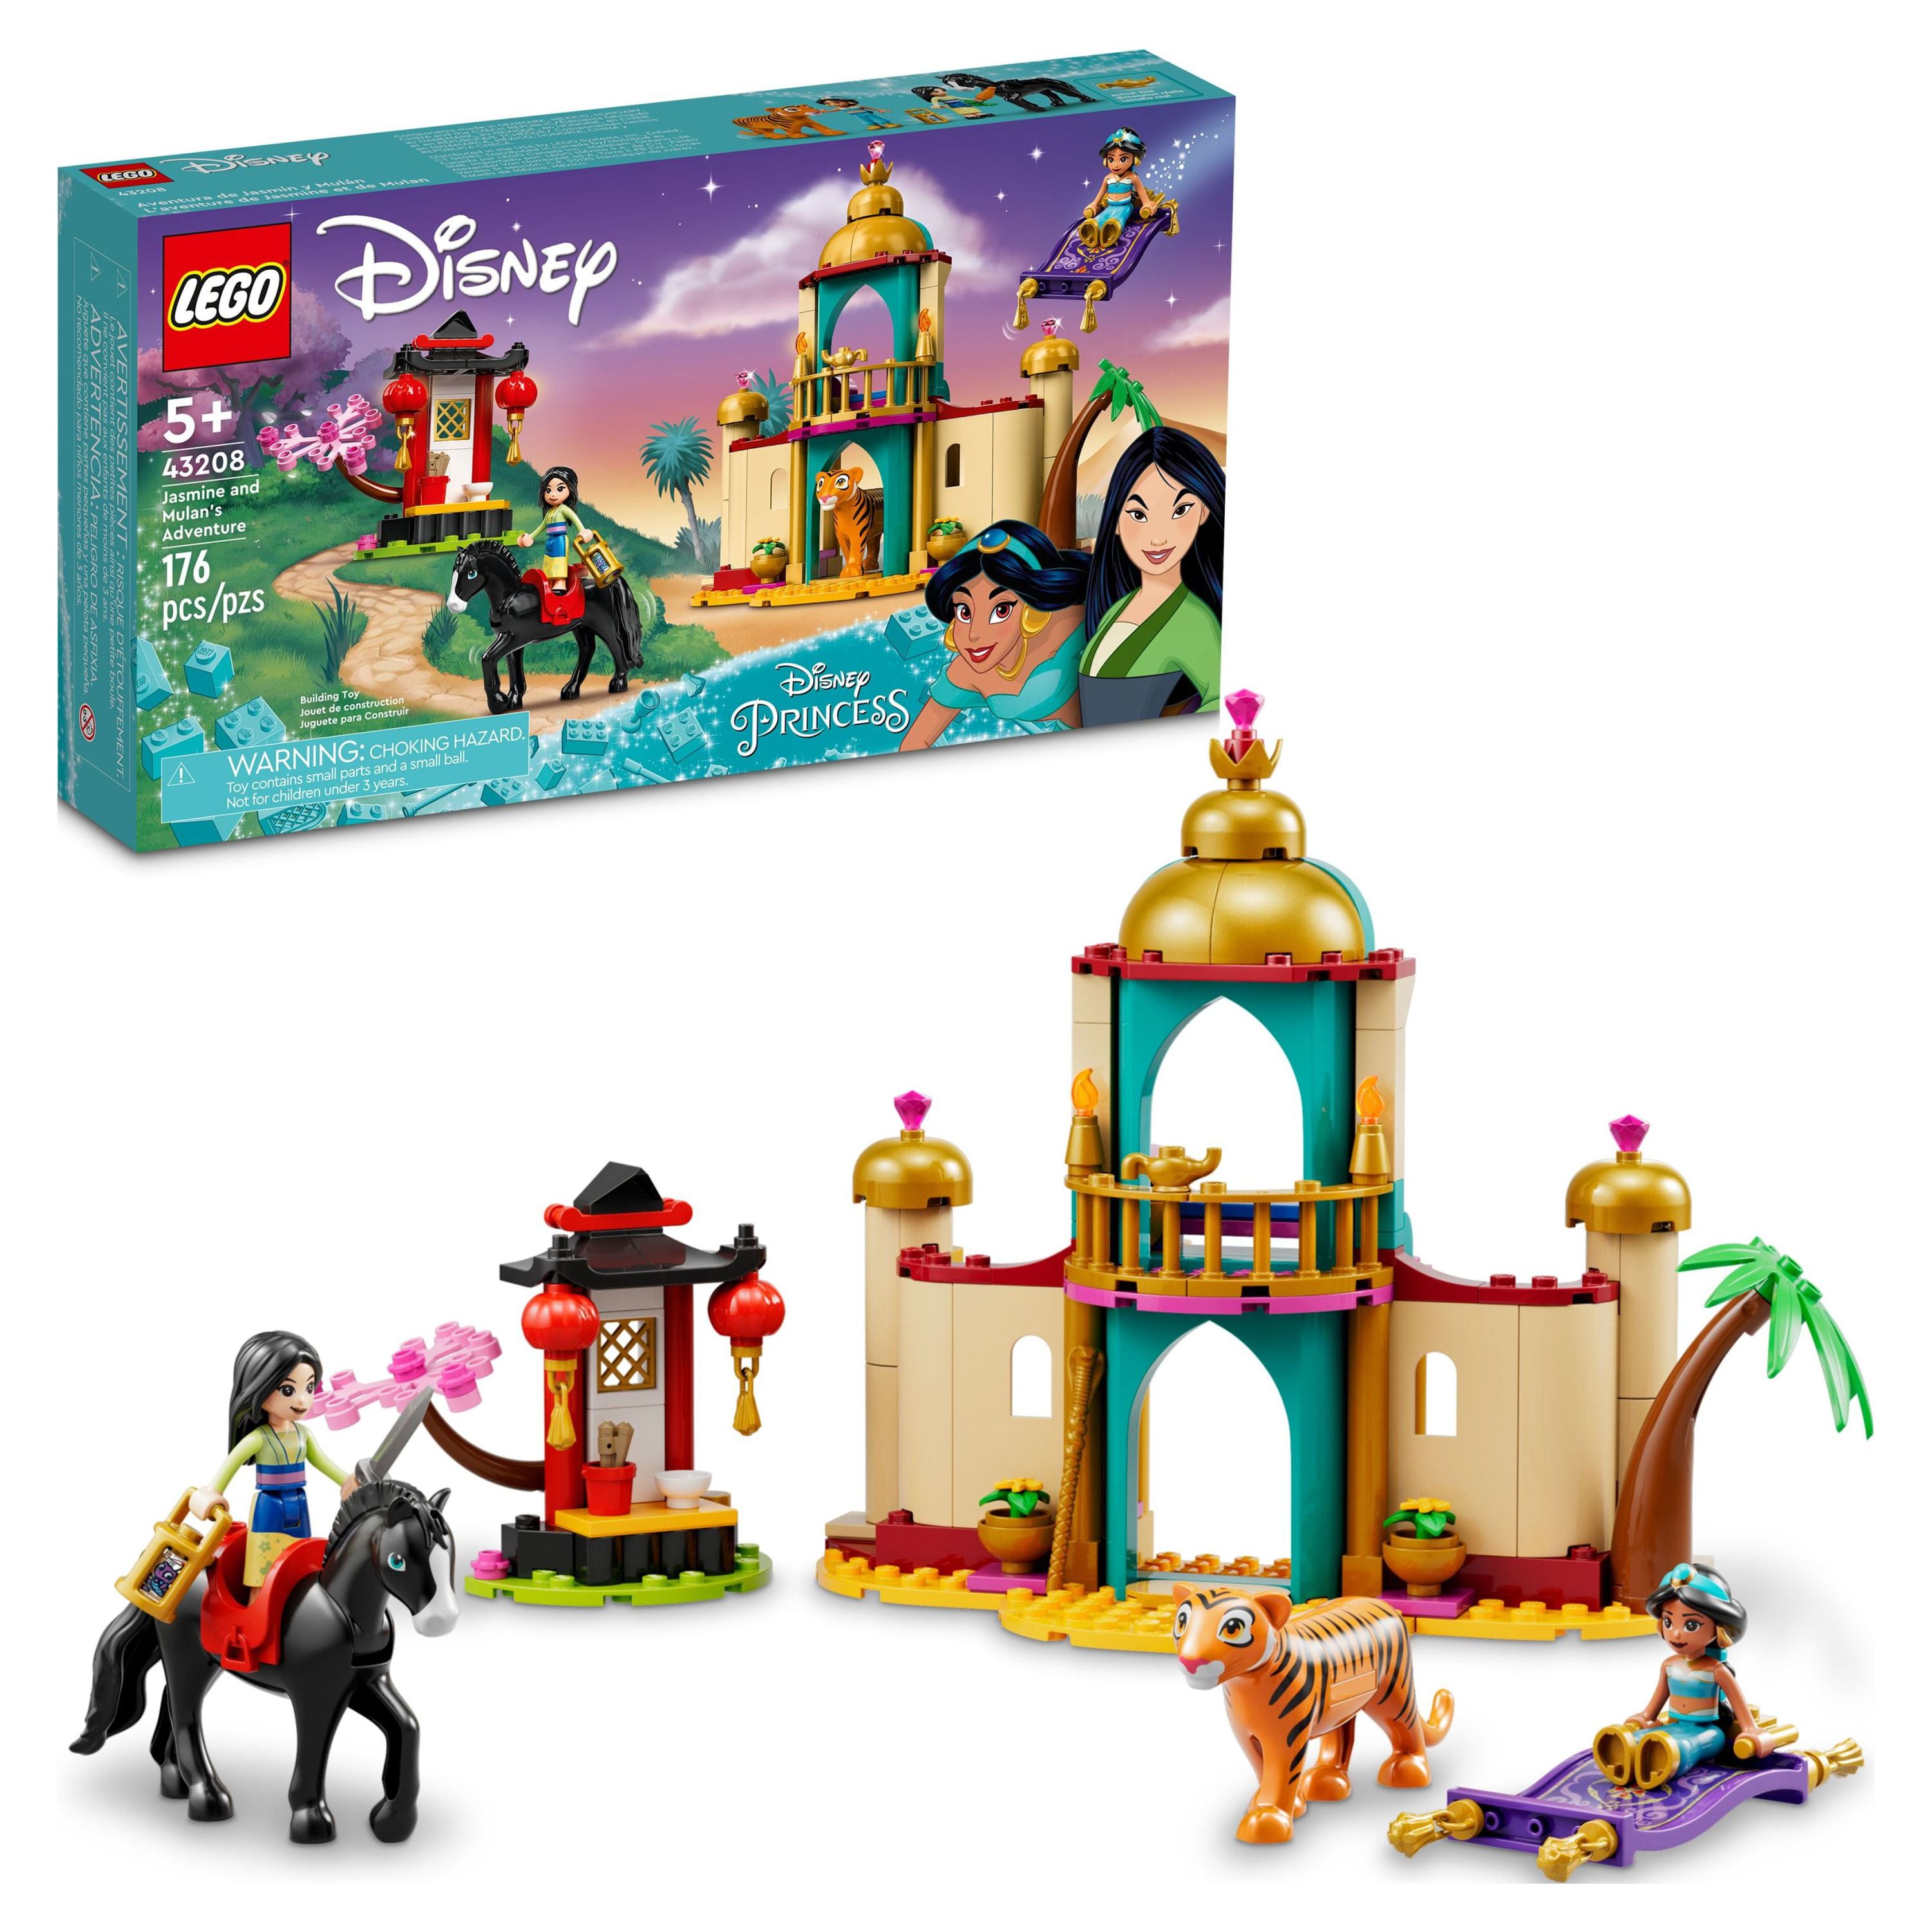 LEGO Disney Princess Jasmine and Mulan’s Adventure 43208 Palace Set,  Aladdin & Mulan Buildable Toy with Horse and Tiger Figures, Gifts for Kids, Girls & Boys - image 1 of 8